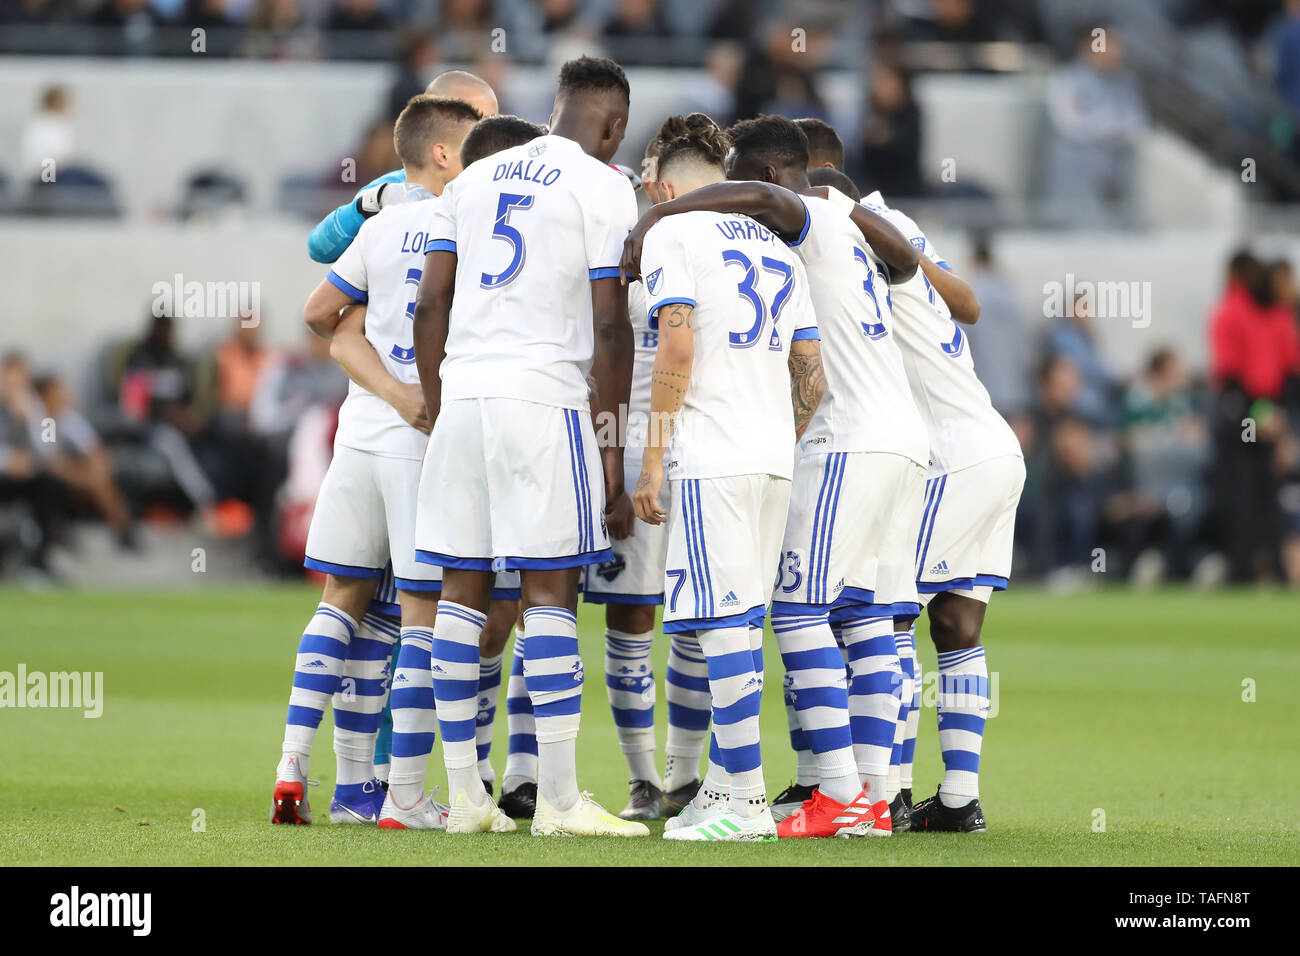 Los Angeles, CA, USA. 24th May, 2019. Impact starters huddle before the start of the game between Montreal Impact and Los Angeles FC at Banc of California Stadium in Los Angeles, CA., USA. (Photo by Peter Joneleit) Credit: csm/Alamy Live News Stock Photo